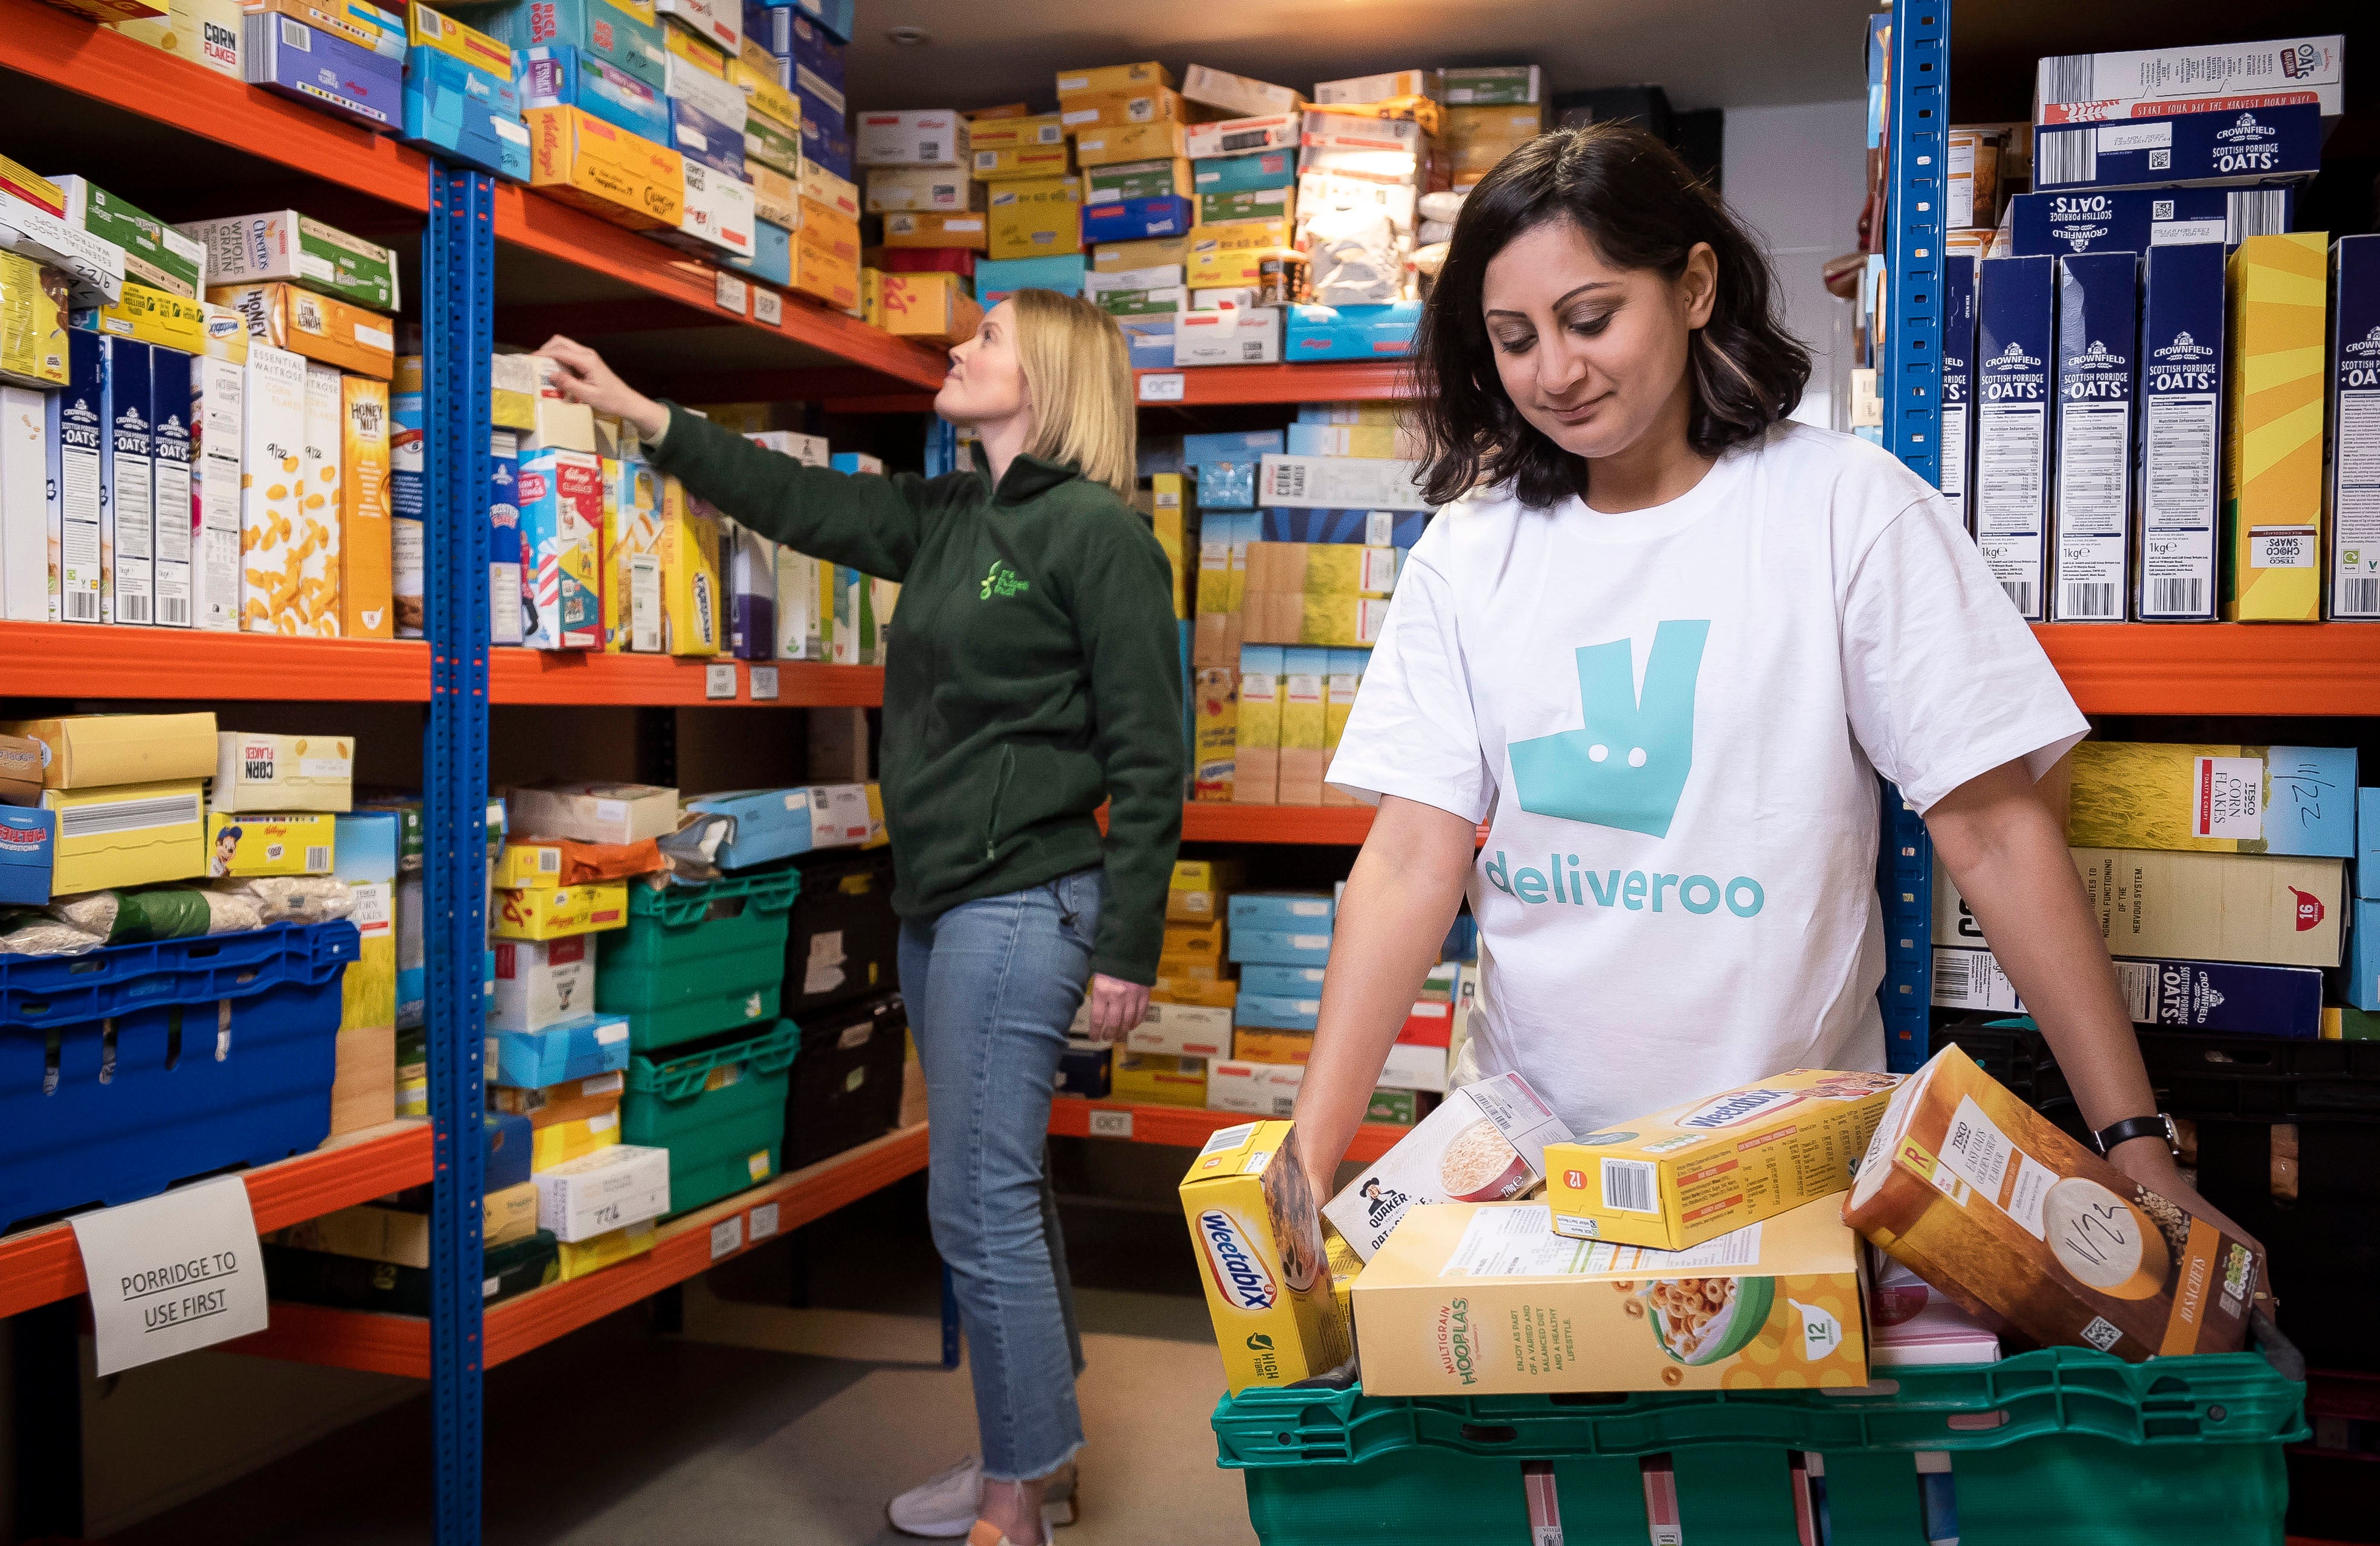 Deliveroo and Trussell Trust are partnering to provide up to two million meals and support for people facing hunger (Deliveroo/PA)